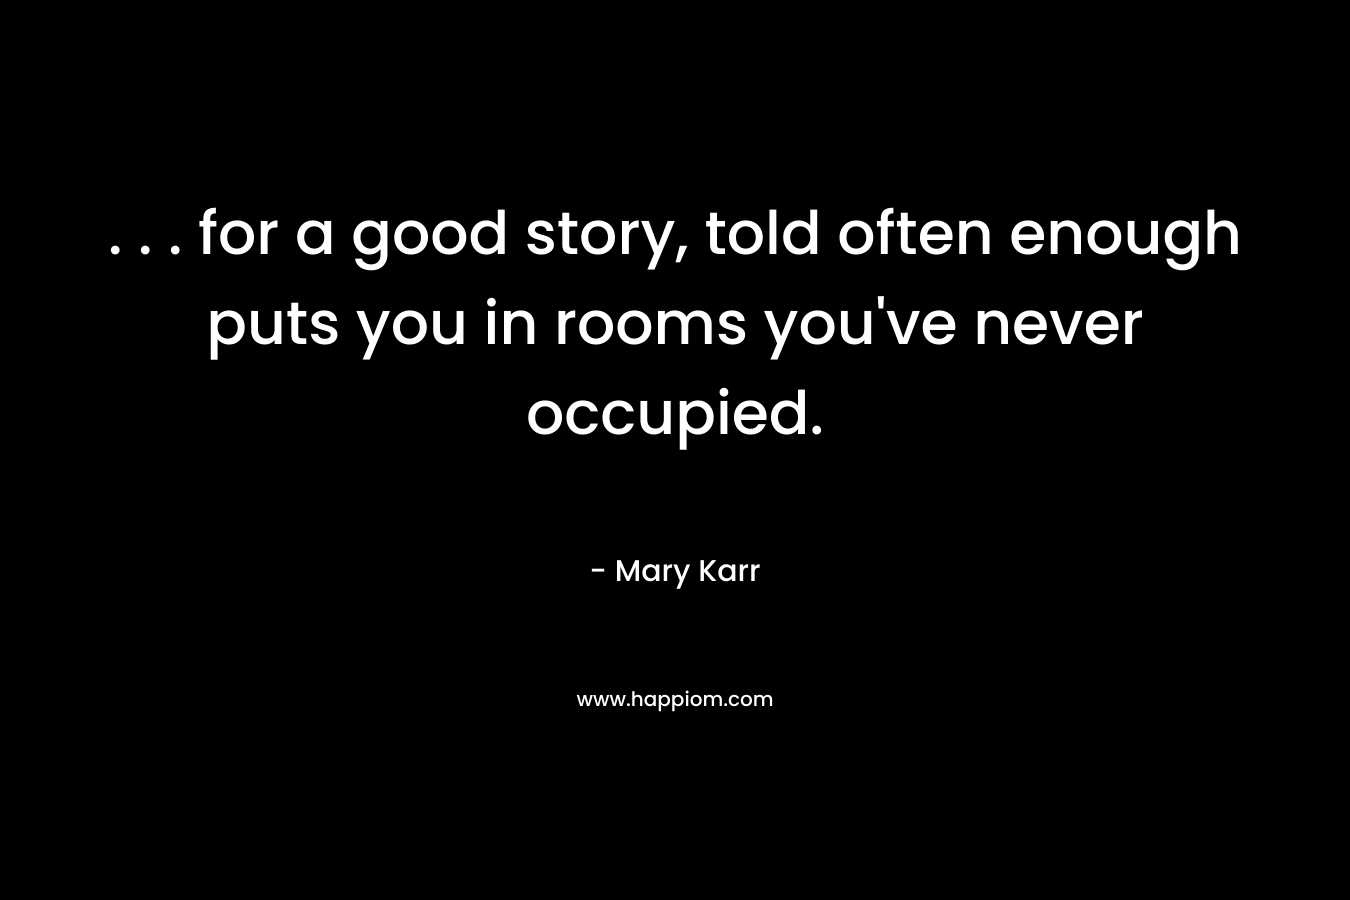 . . . for a good story, told often enough puts you in rooms you've never occupied.